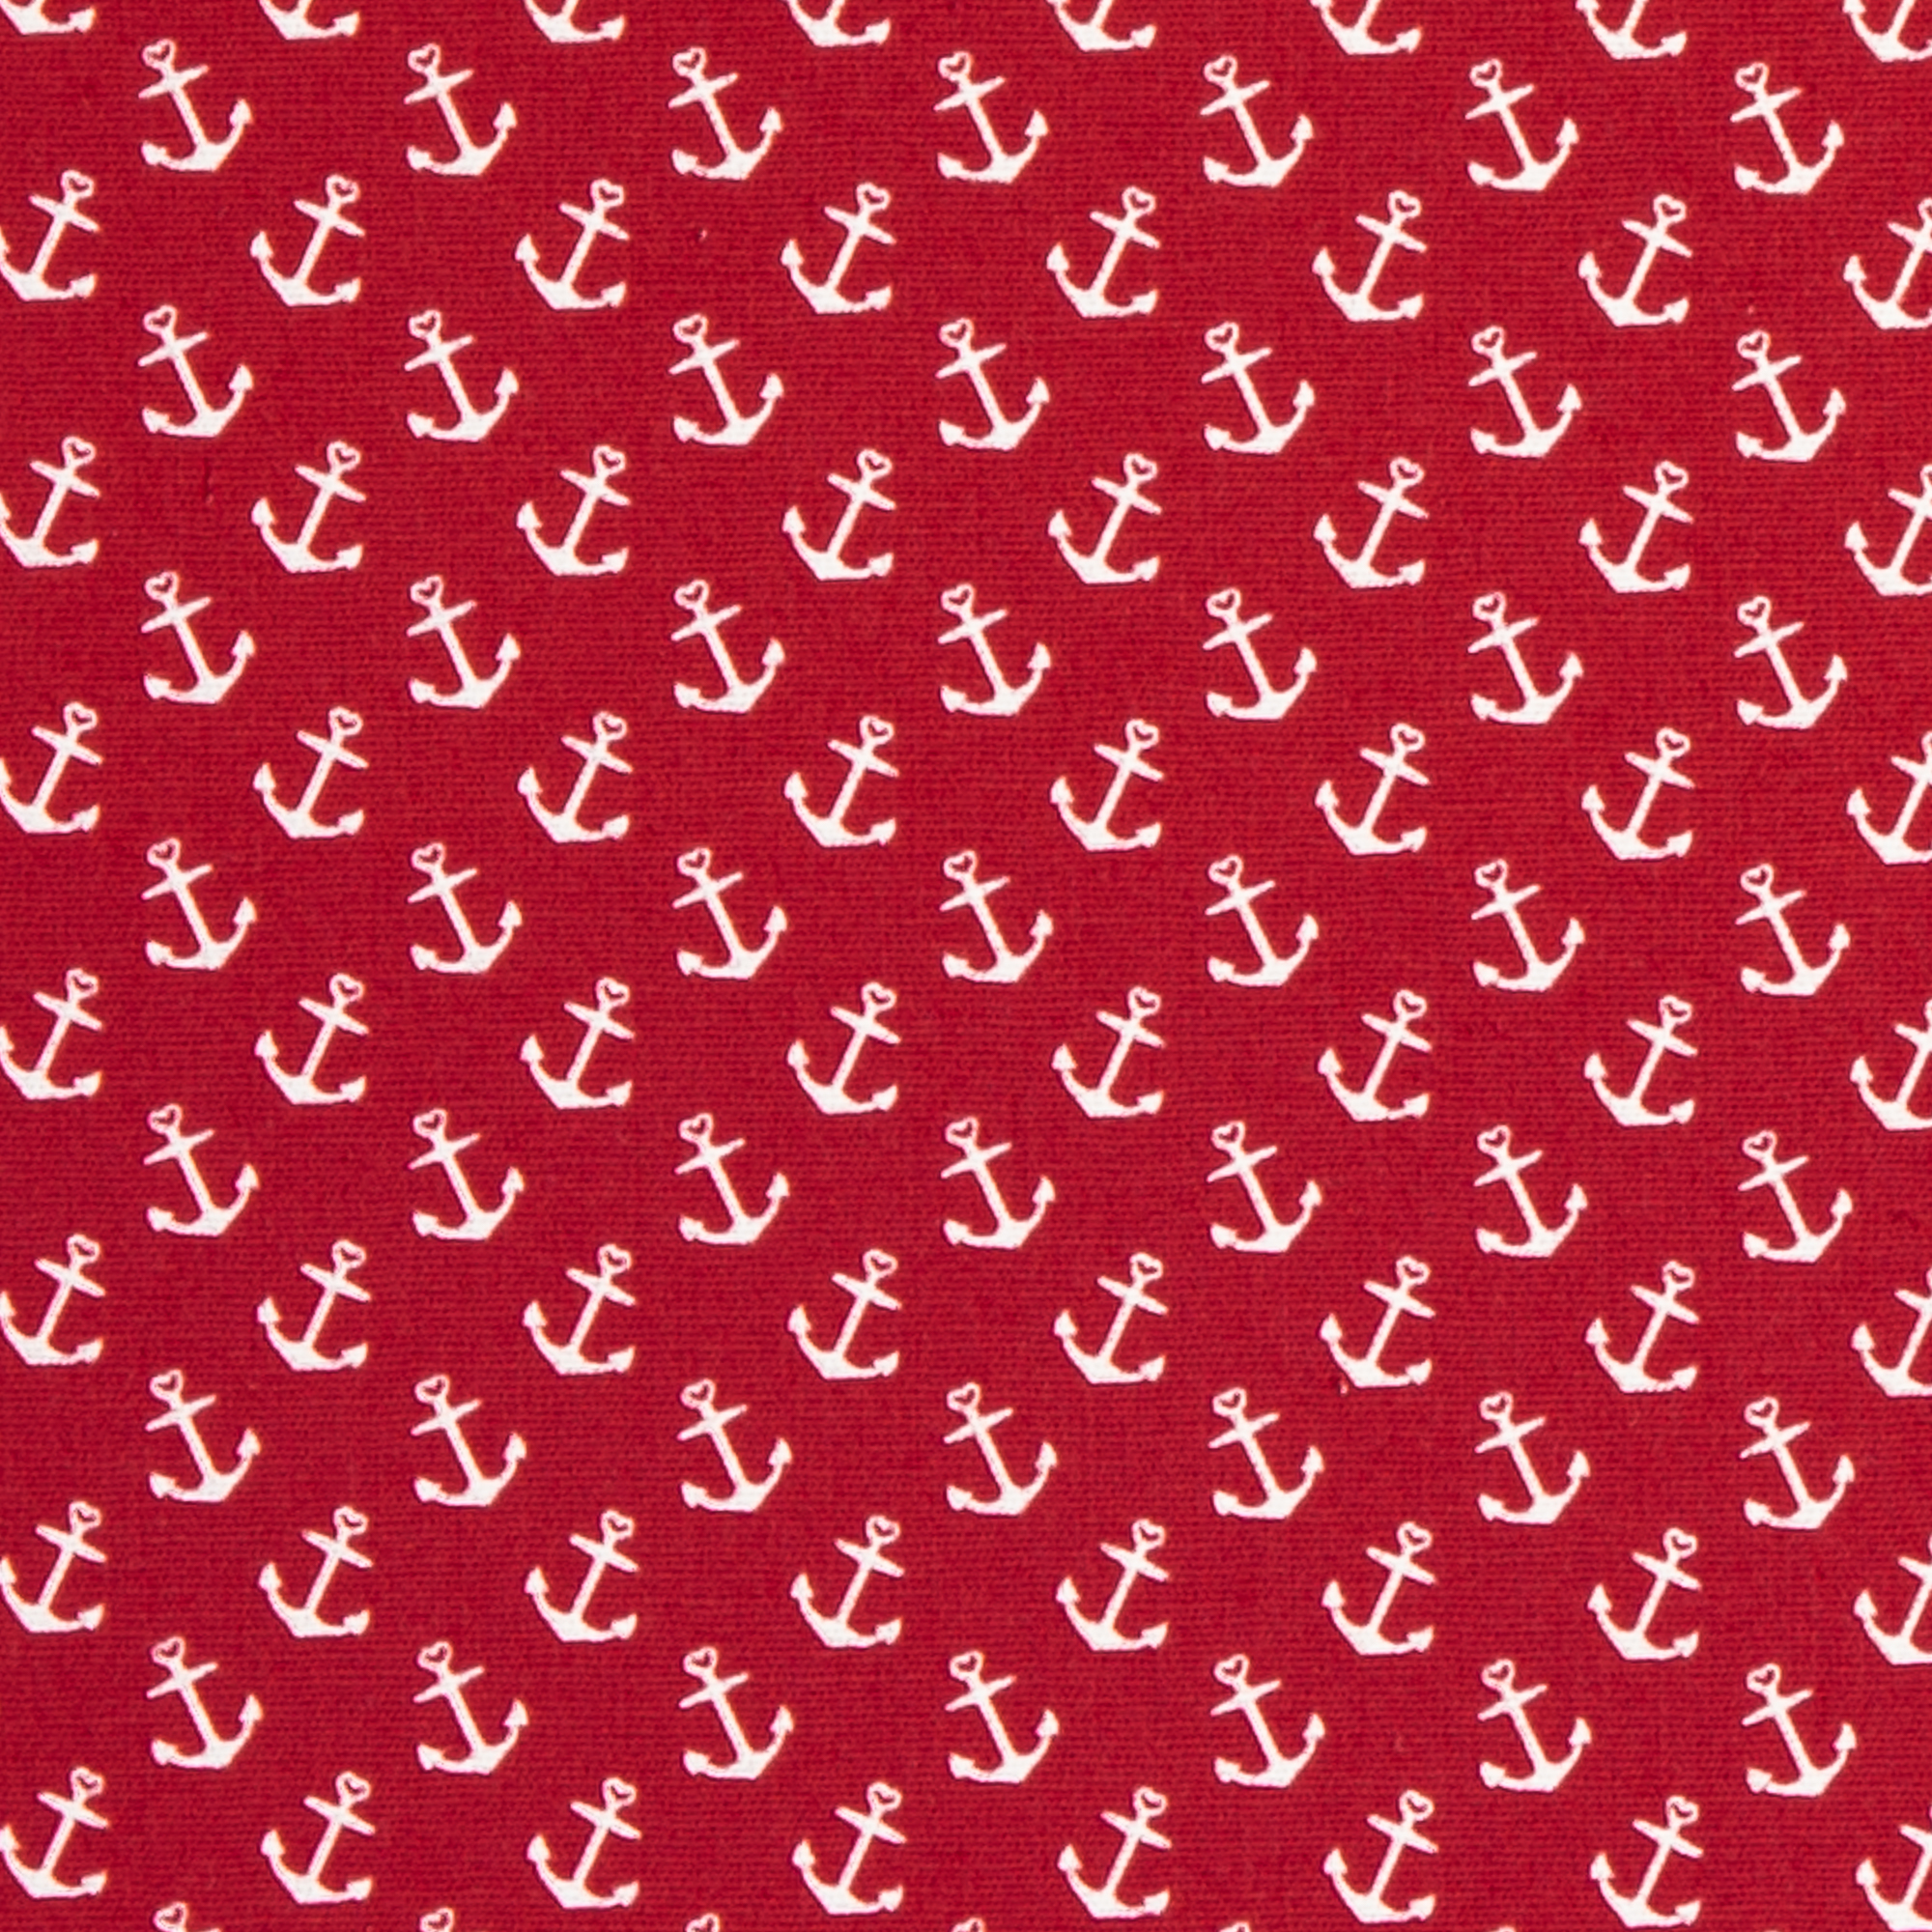 Maritime - Anchor - red-white